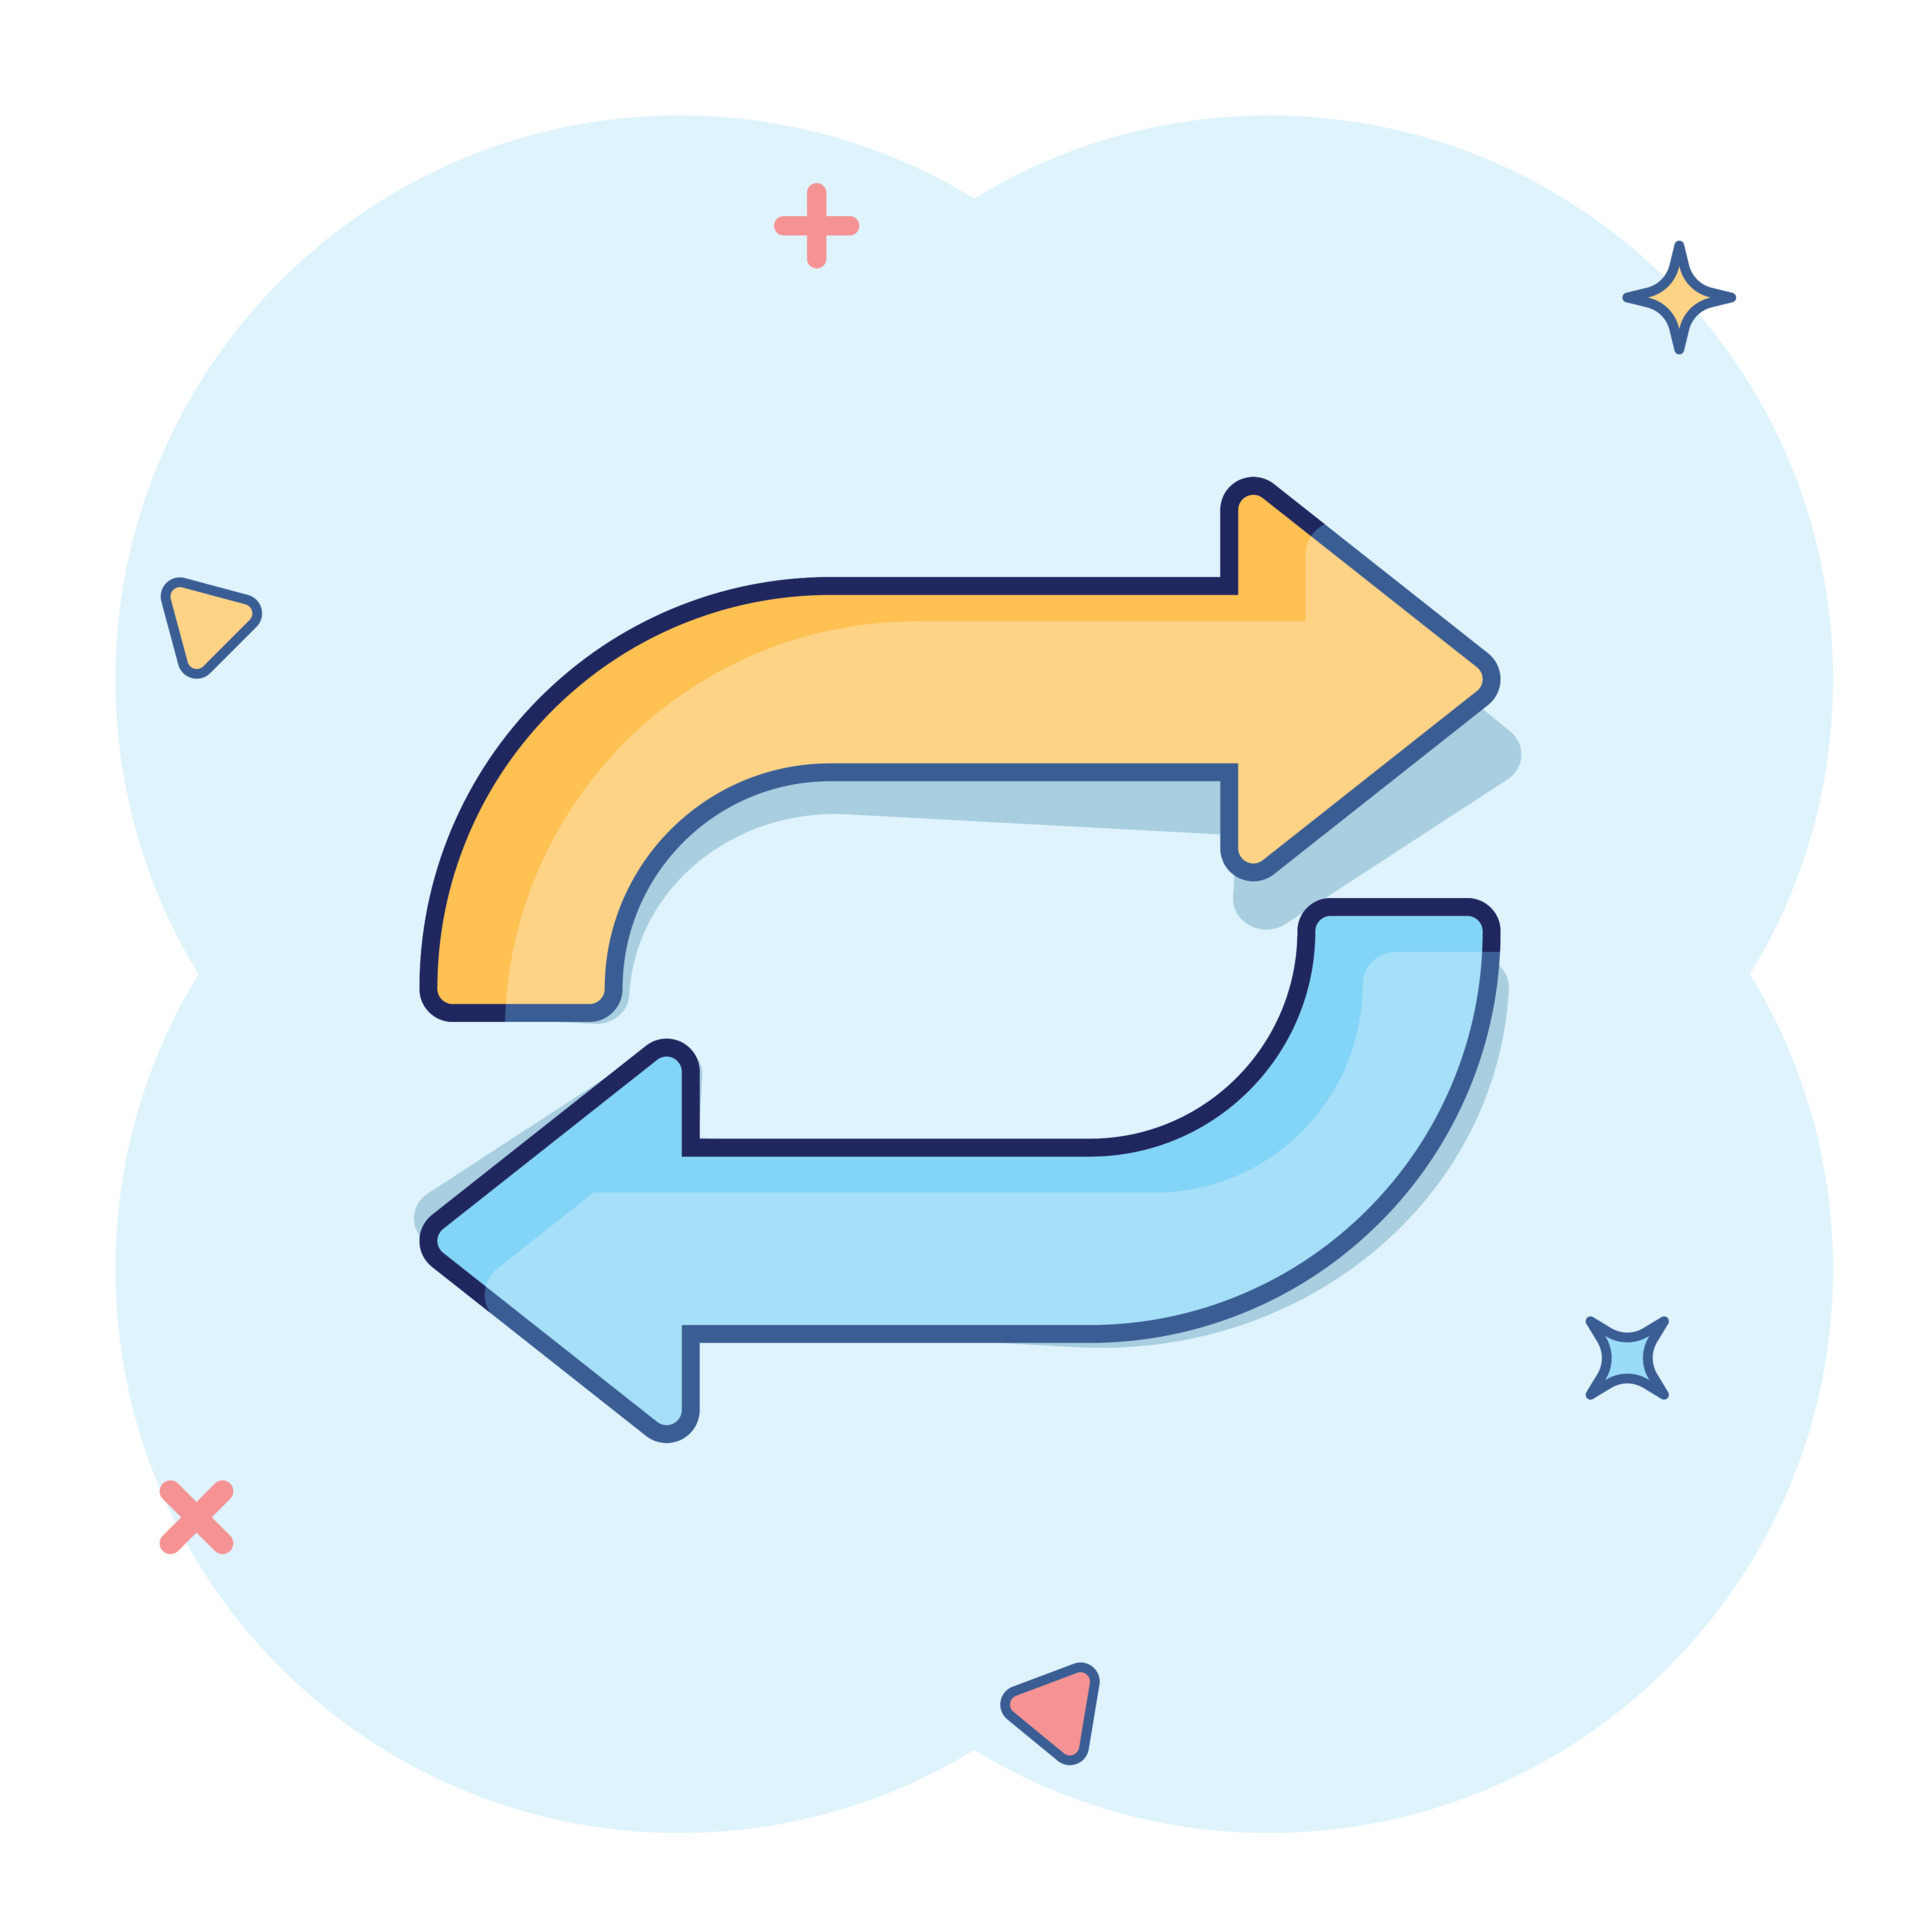 https://static.vecteezy.com/system/resources/previews/016/146/009/original/arrow-rotation-icon-in-comic-style-sync-action-cartoon-illustration-on-white-isolated-background-refresh-button-splash-effect-business-concept-vector.jpg